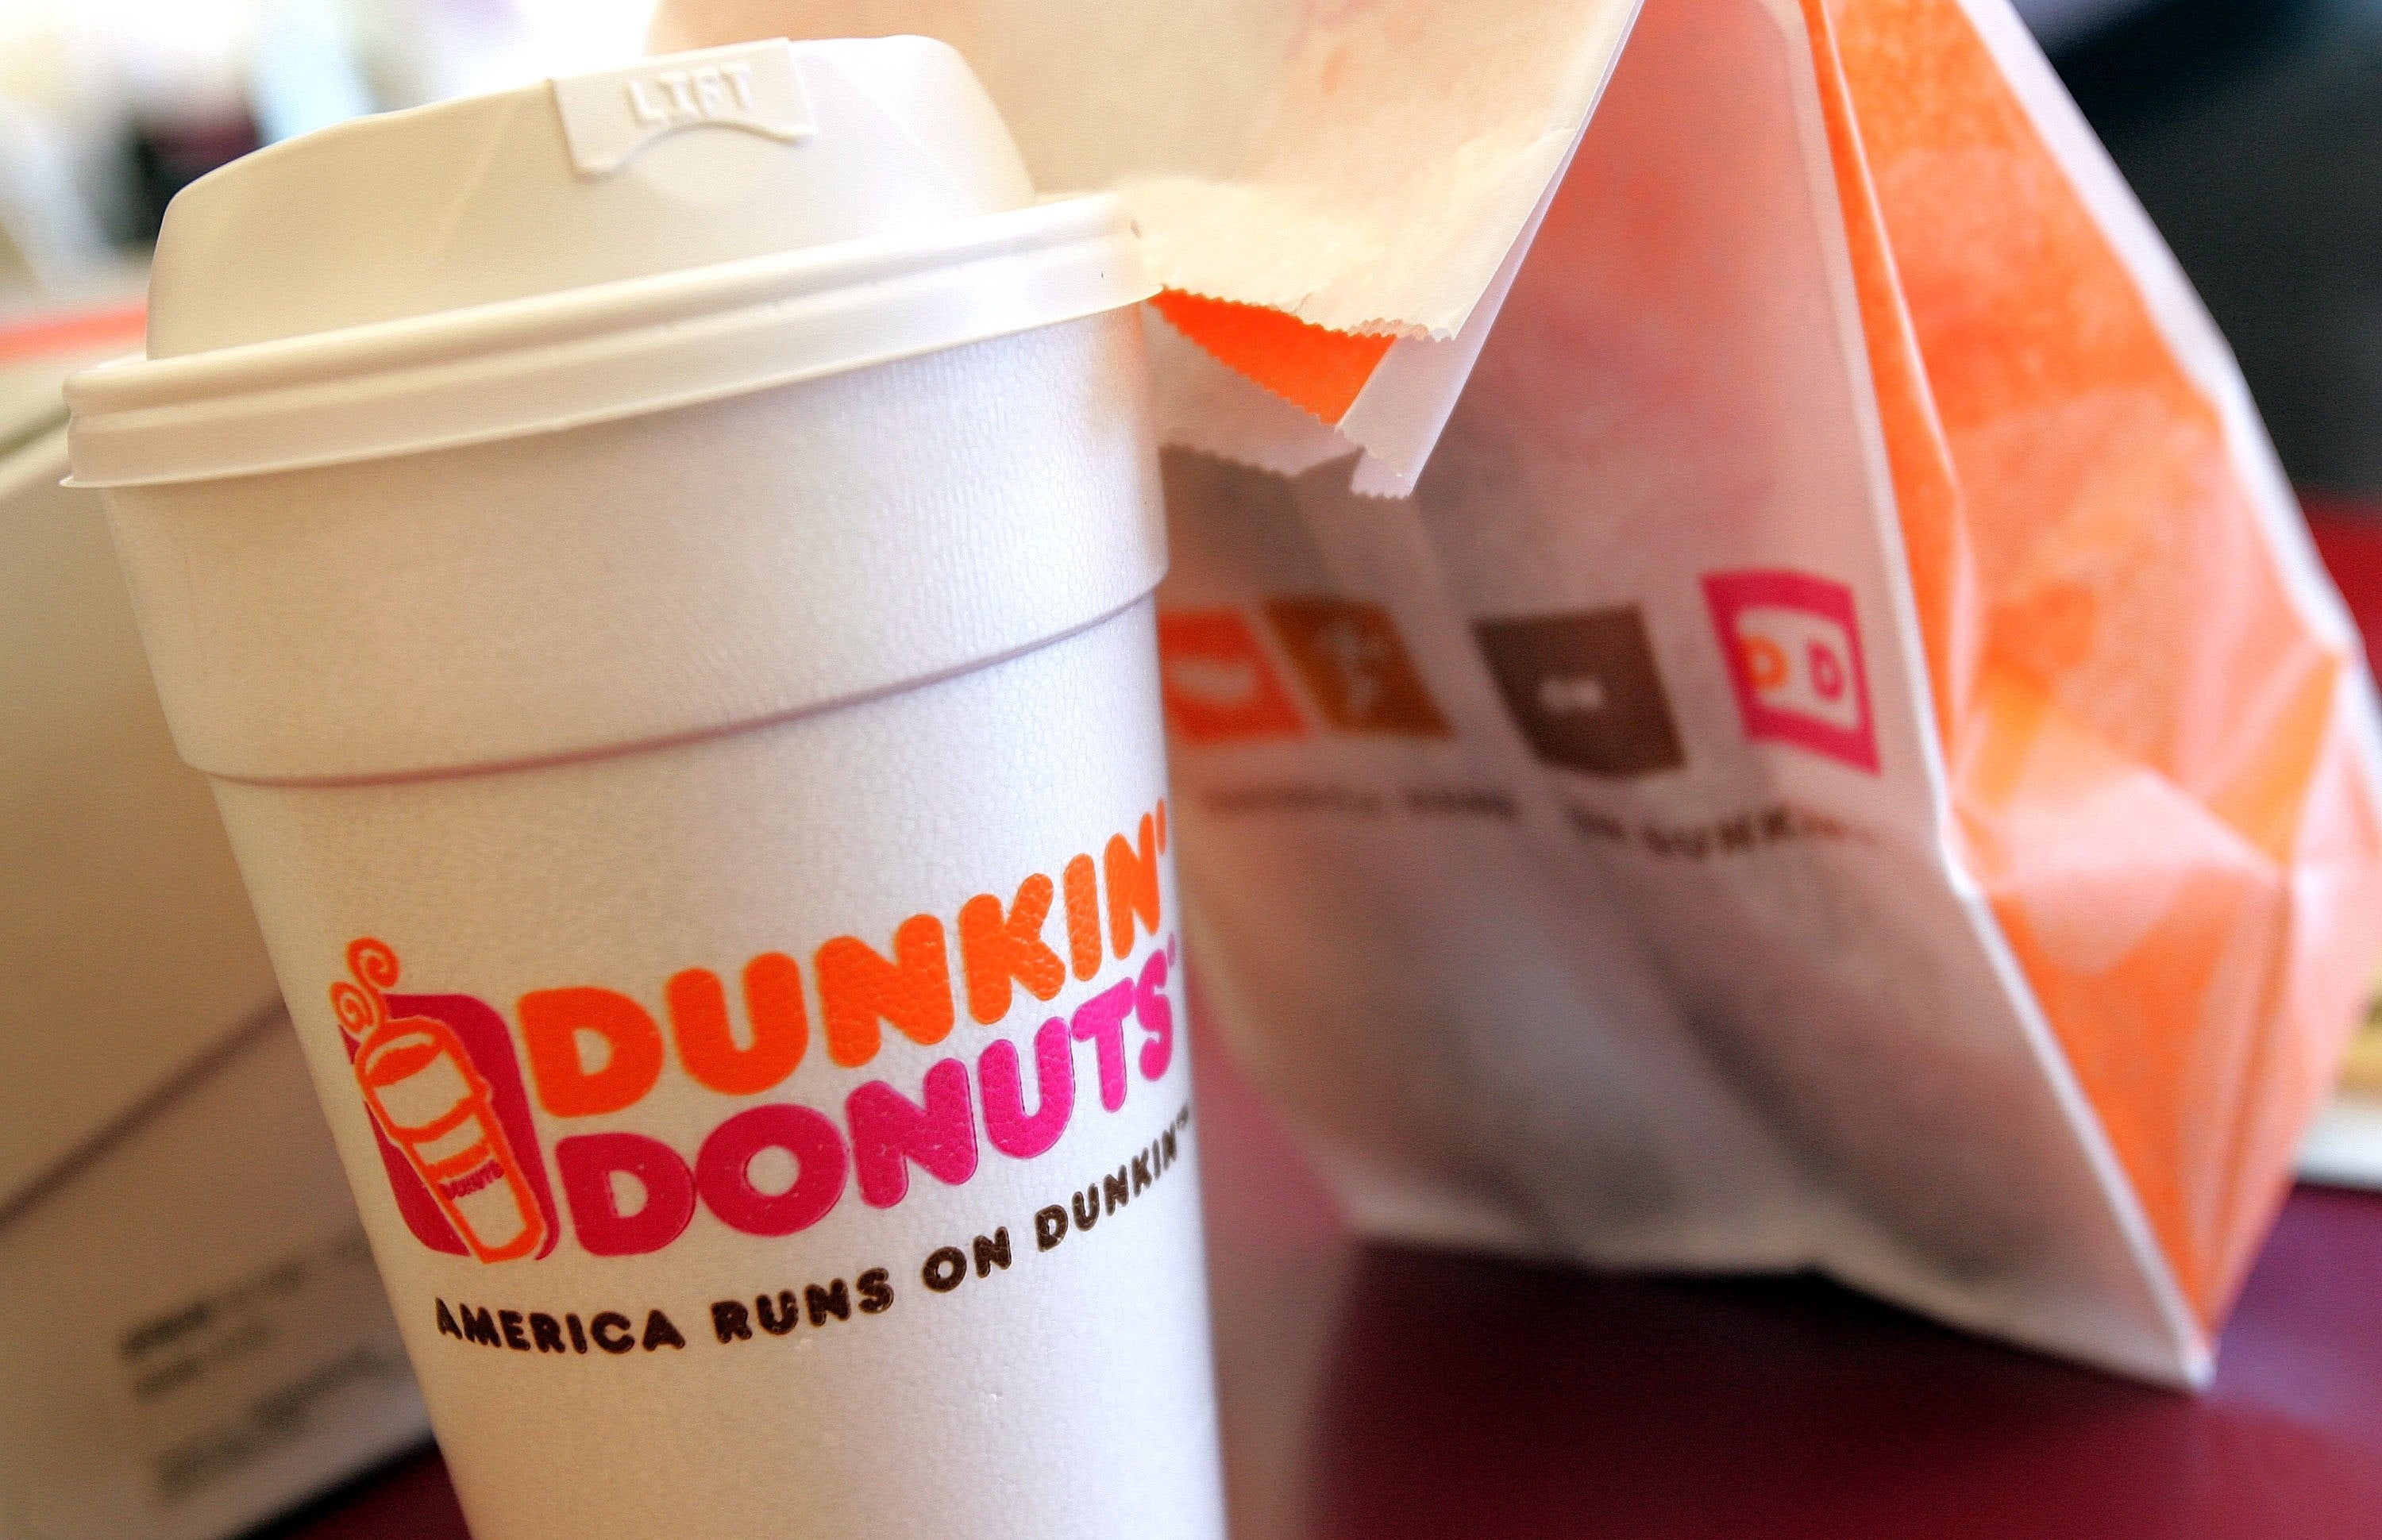 “America may run on Dunkin’, but our client had to re-learn how to walk due to the severity of her burns”